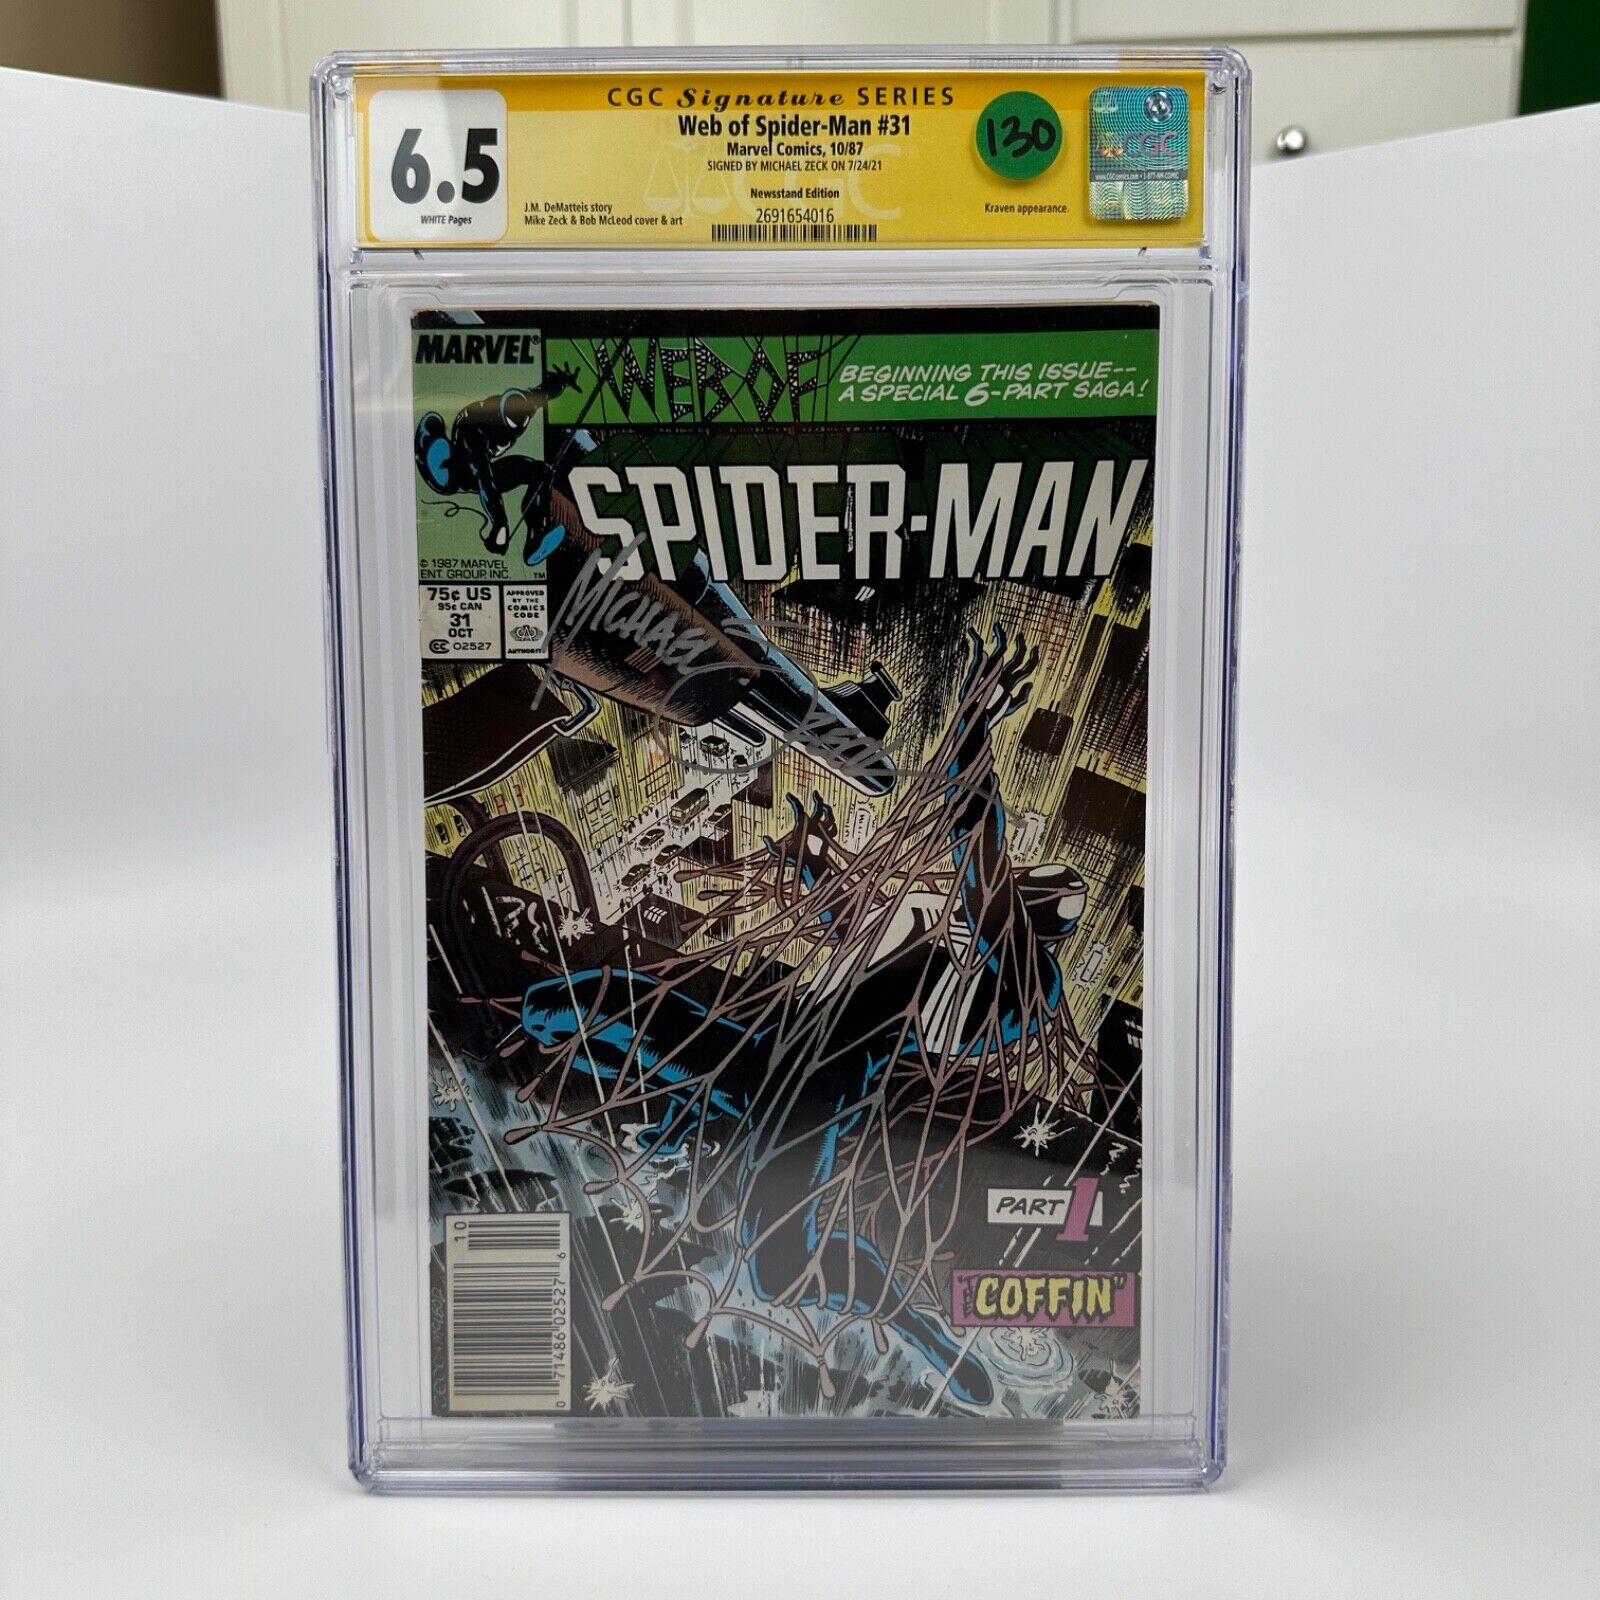 Marvel Comics Web of Spider-Man #31 Signed by Michael Zeck Graded 6.5 CGC